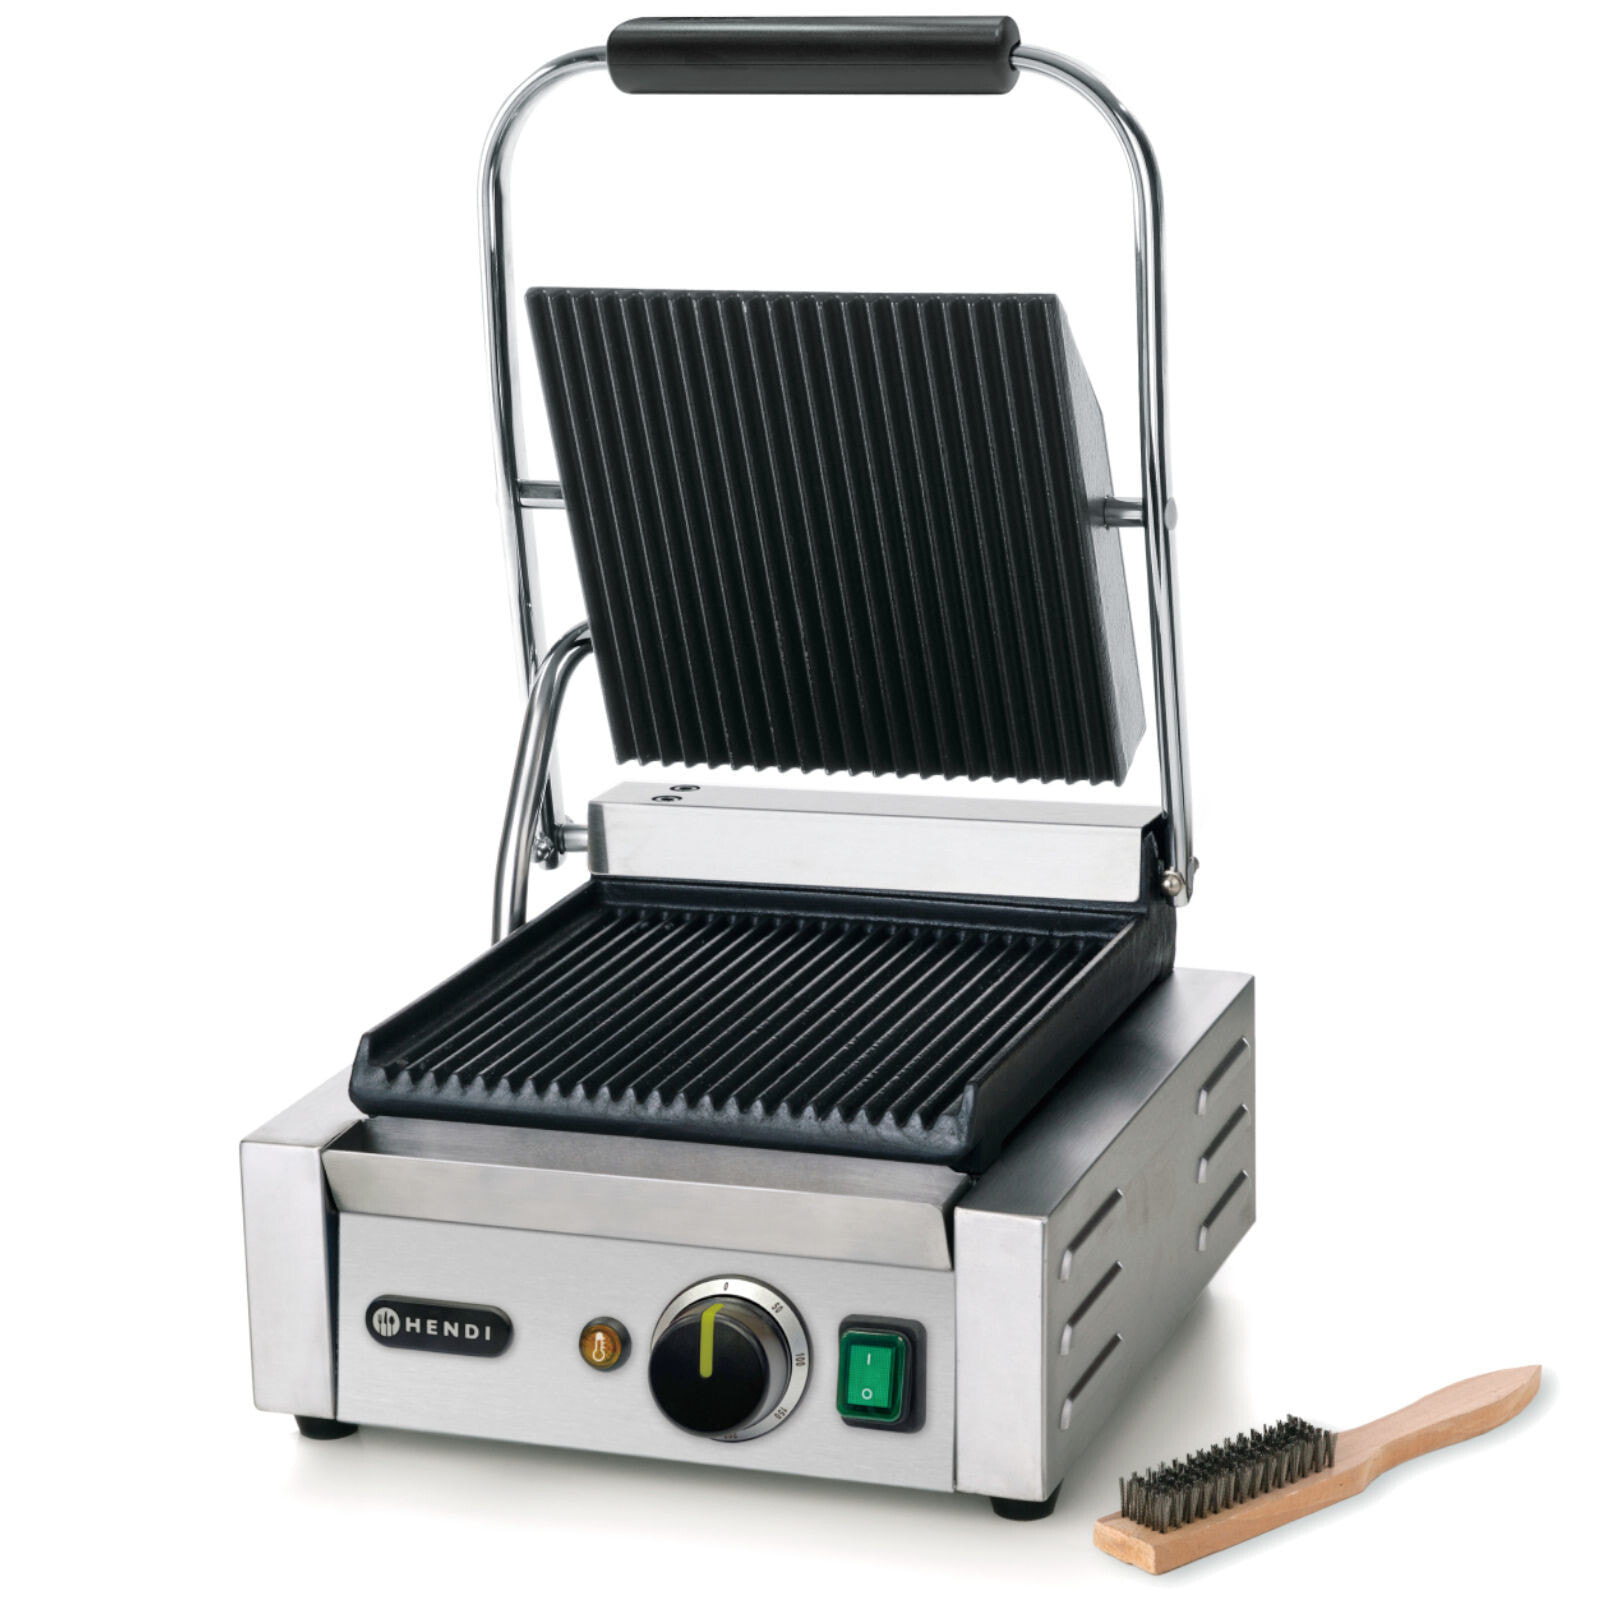 Contact grill single grooved 1800W - Hendi 263501